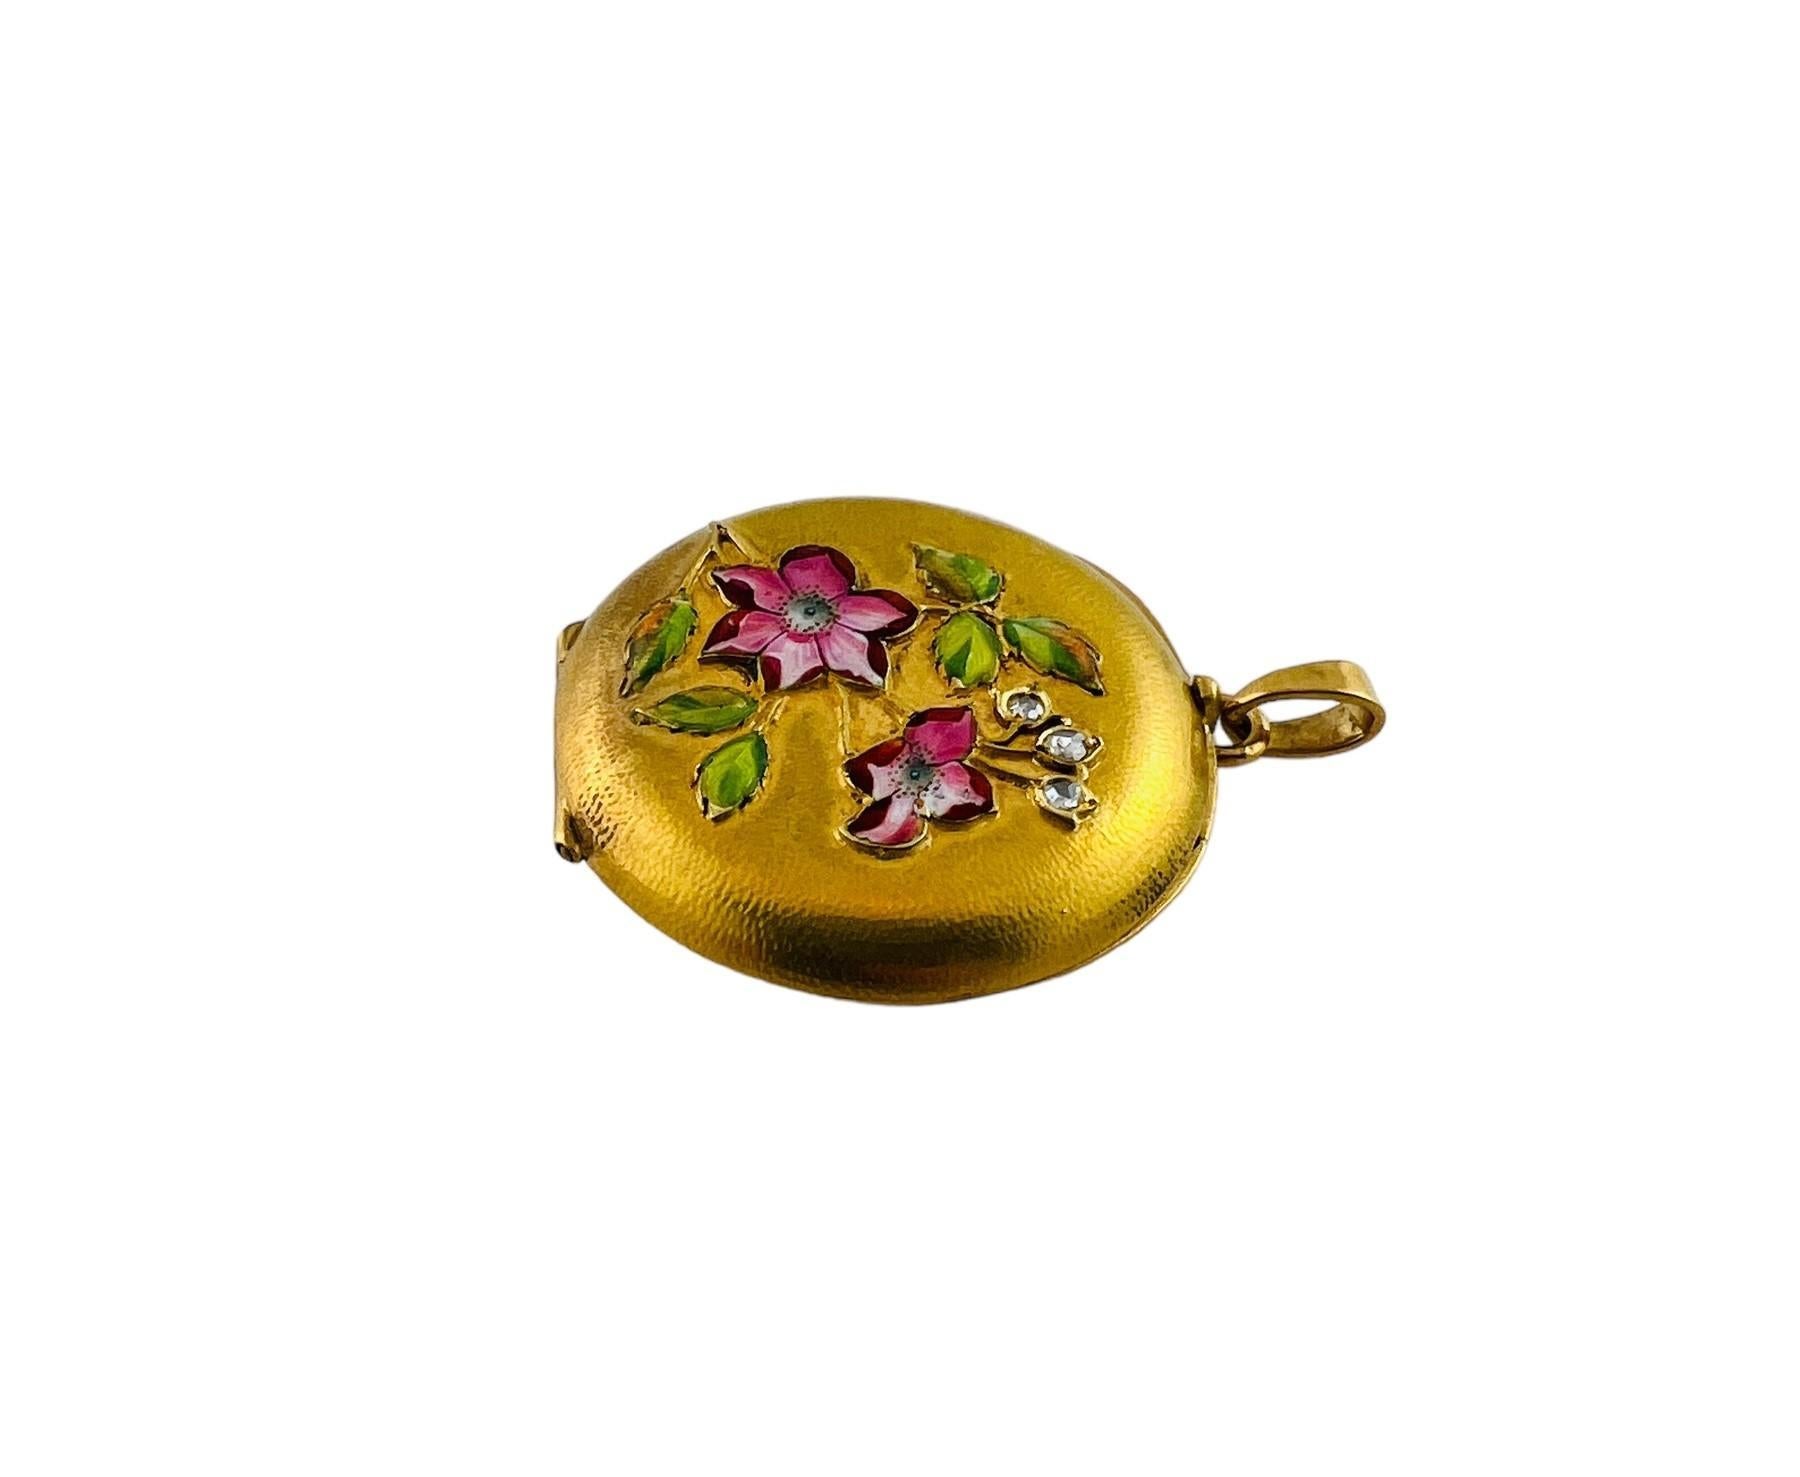 Women's 18K Yellow Gold and Enamel Round Locket with Floral Design #16549 For Sale